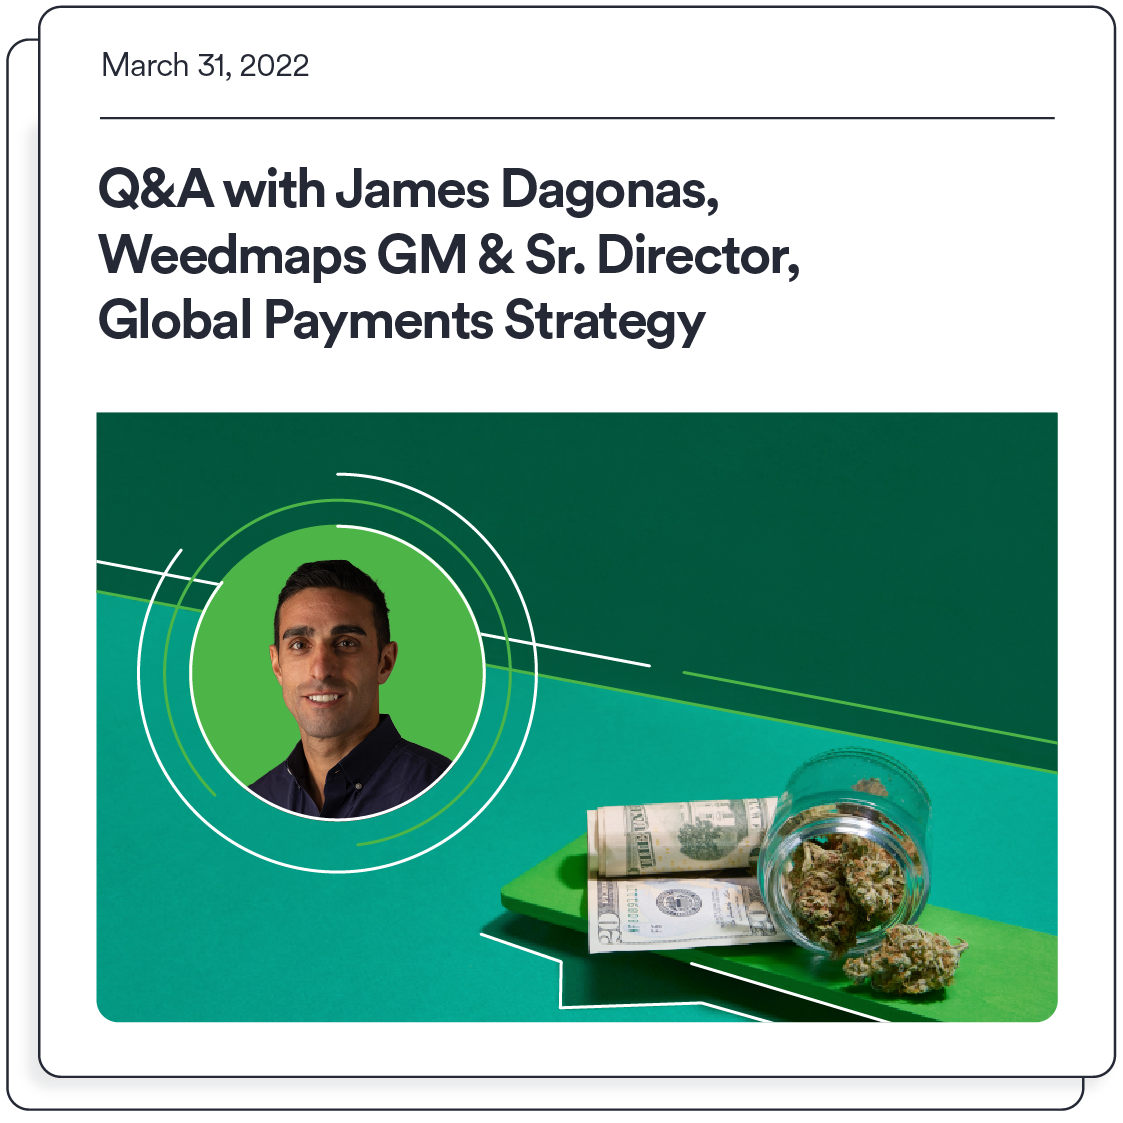 Weedmaps Global Payments Strategy